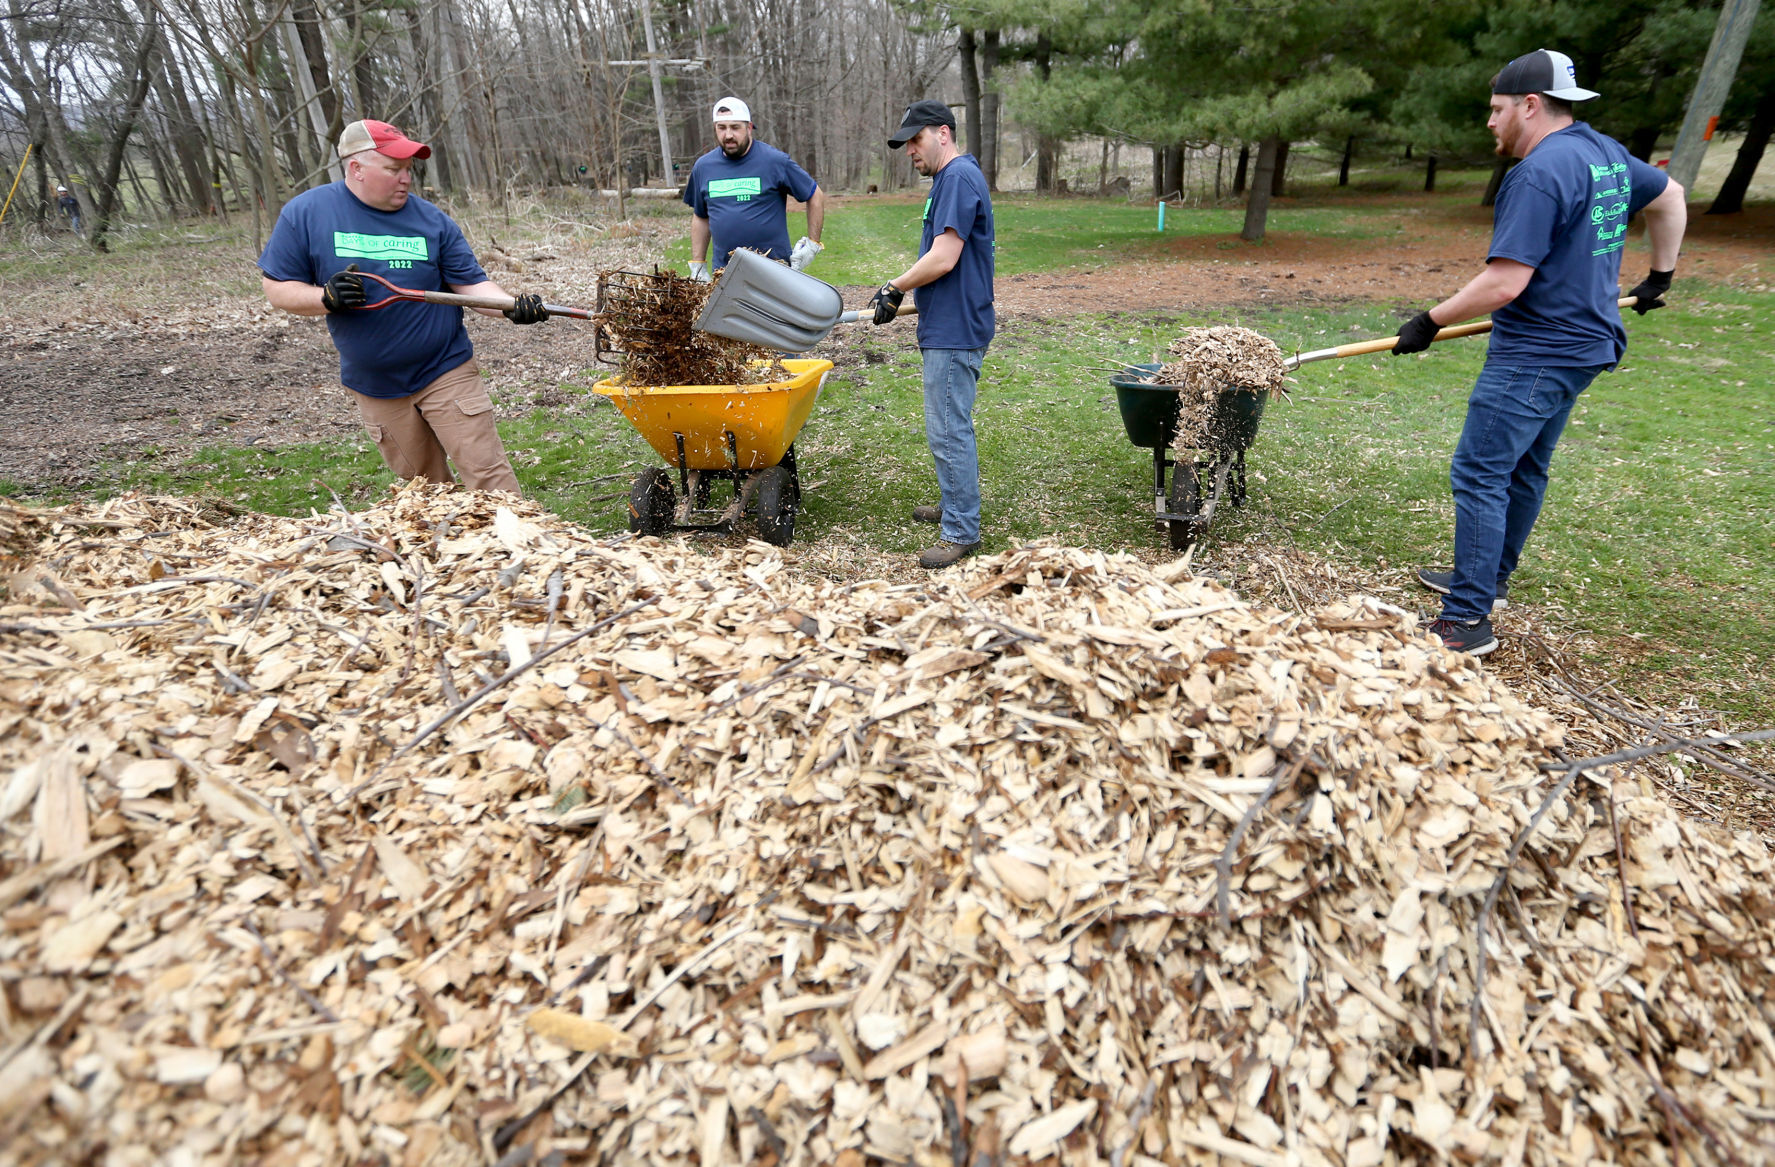 Jeremy Funston (from left), Justin Sauser, and Joe Cannavo, all employees of HTLF, and Keith McGinnis, an employee of Dubuque Bank & Trust, fill wheelbarrows with mulch at Four Mounds in Dubuque on May 29 as part of Dubuque Days of Caring.    PHOTO CREDIT: JESSICA REILLY, Telegraph Herald